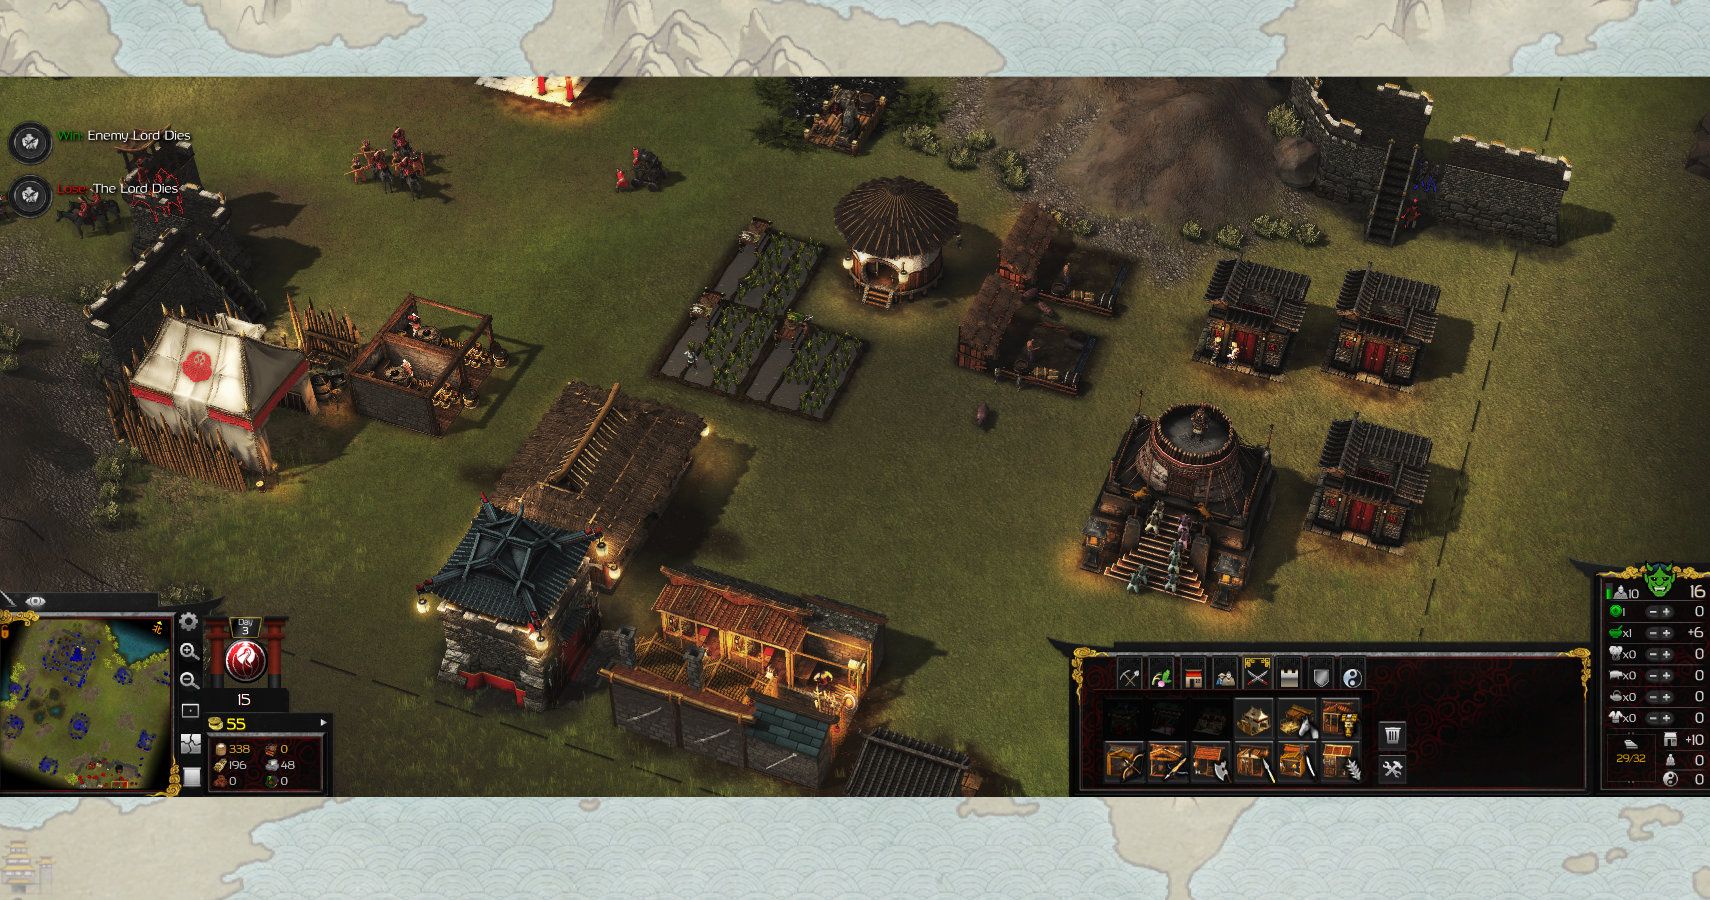 The Stronghold Warlords UI as minimized as possible in 16:9 format.